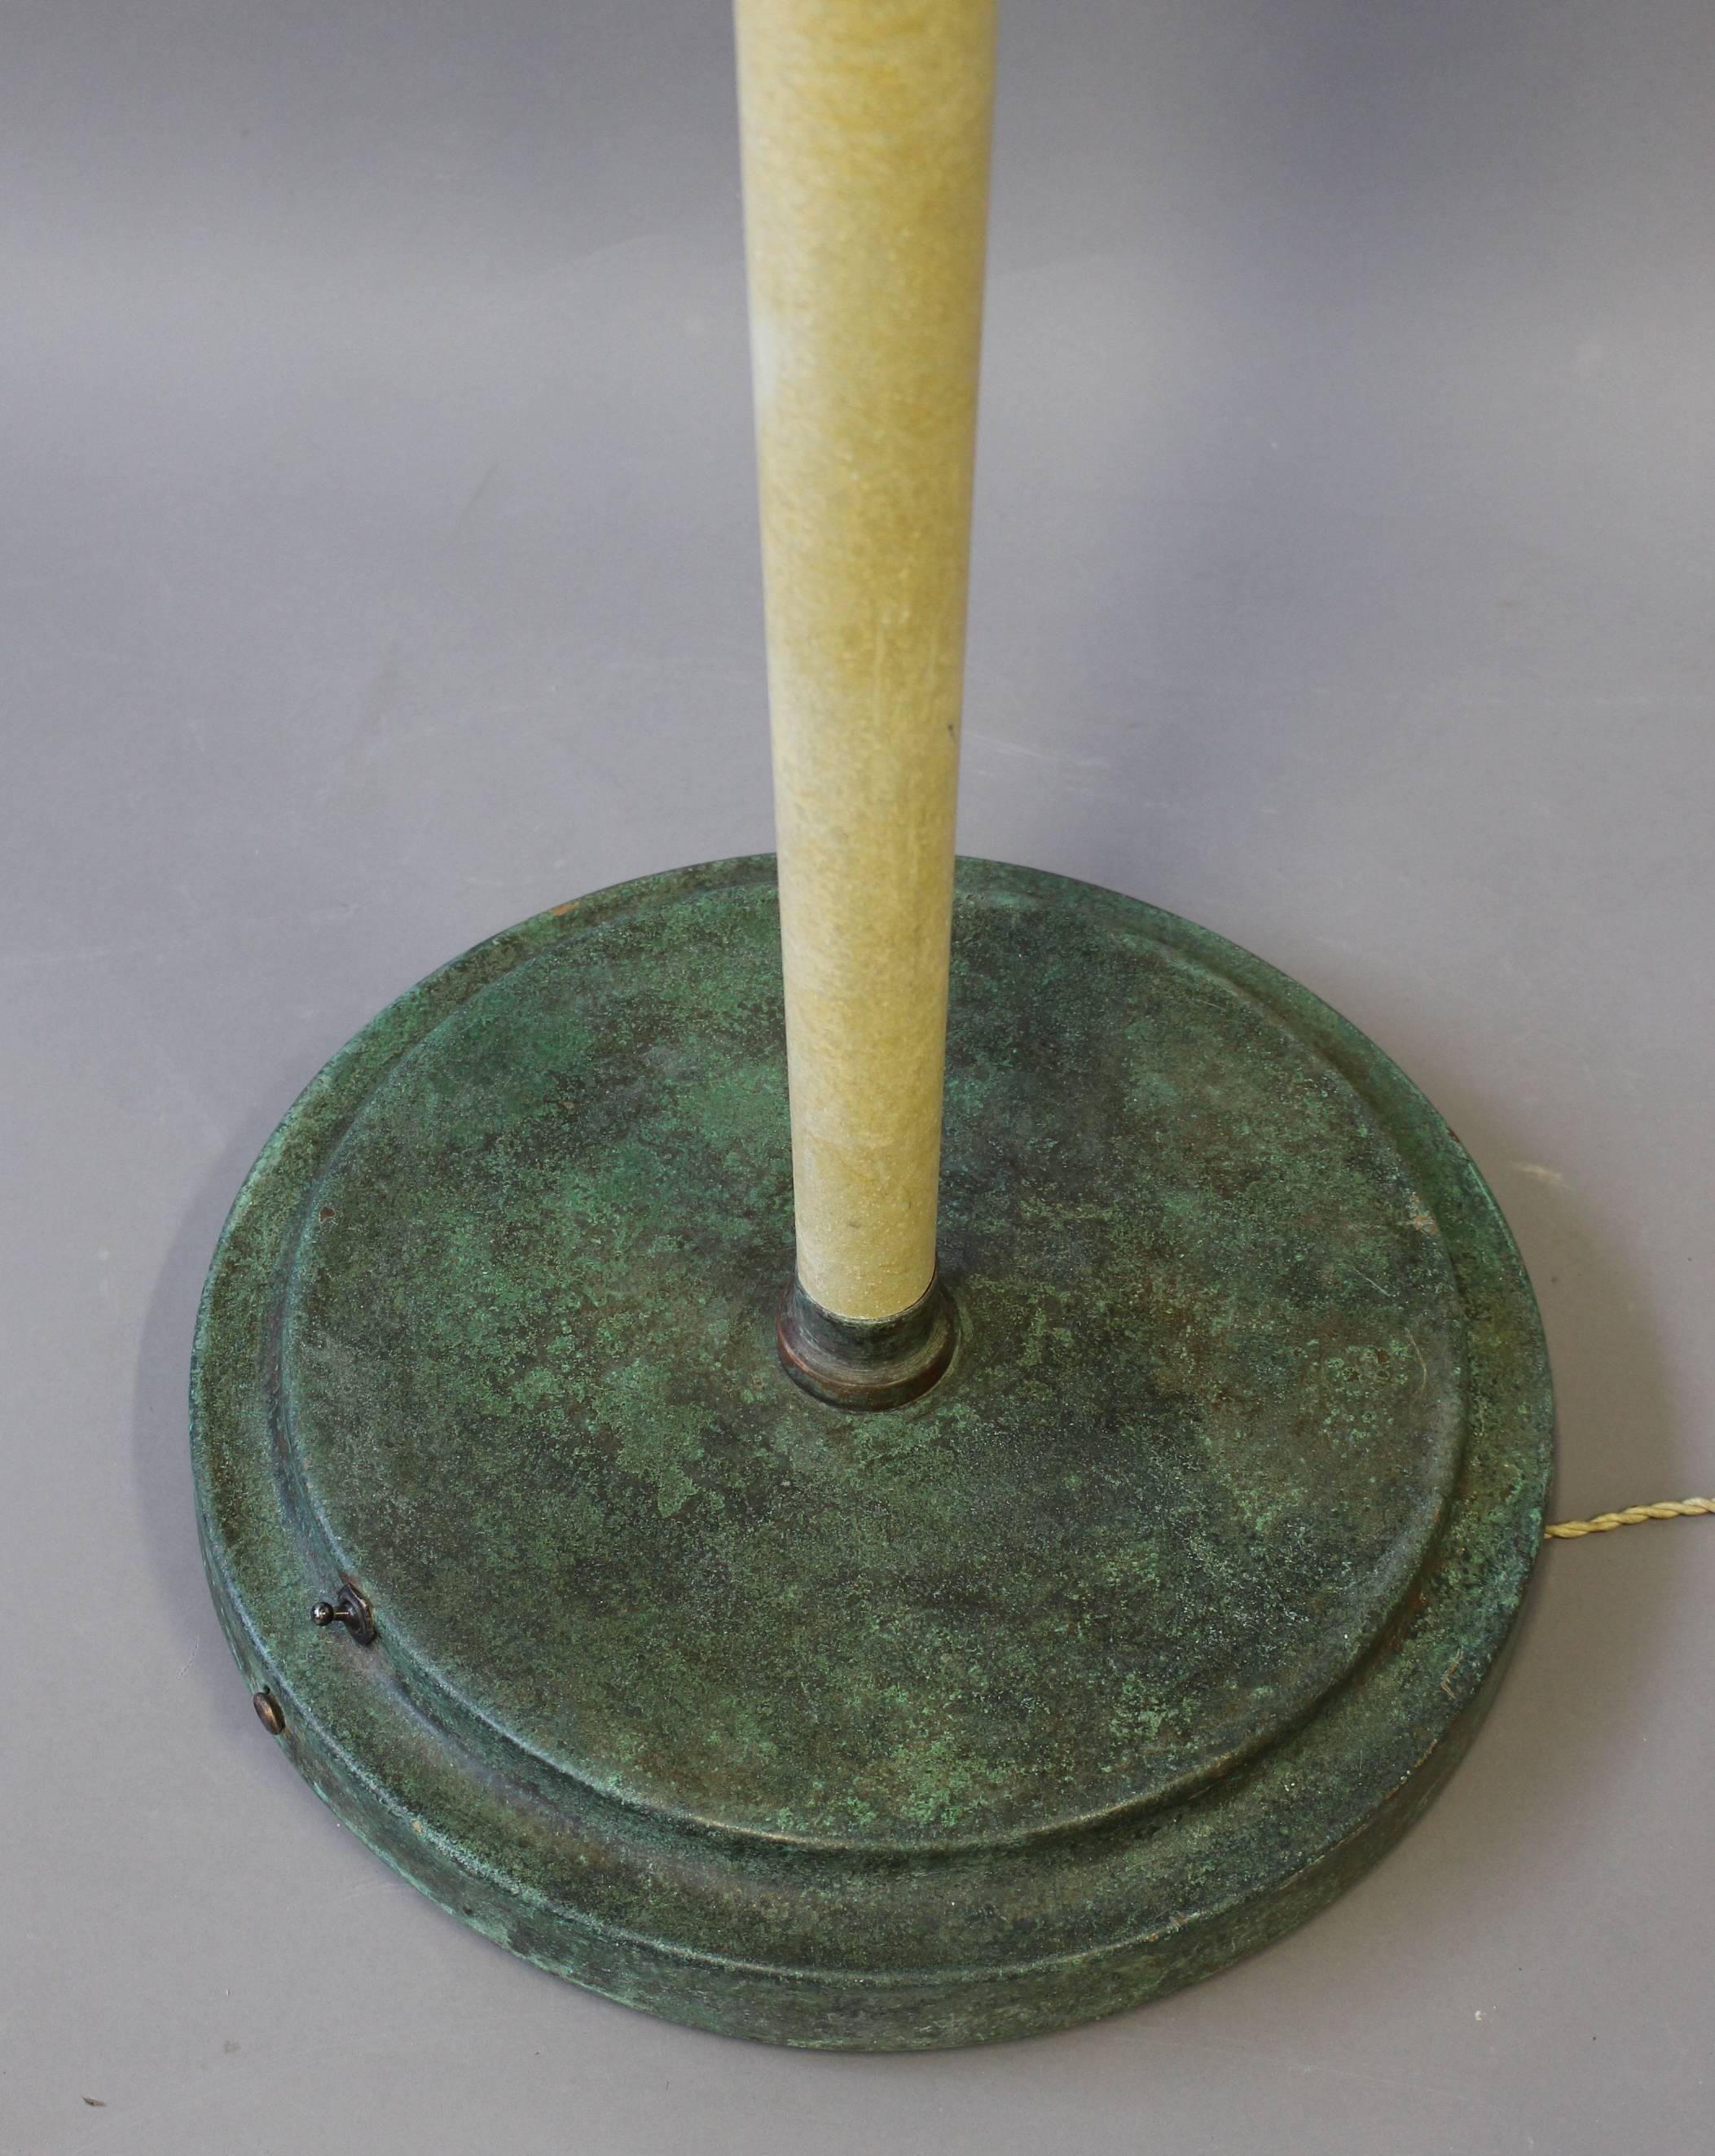 A Large Fine French Art Deco Patina-ed Wood and Metal Floor Lamp For Sale 5